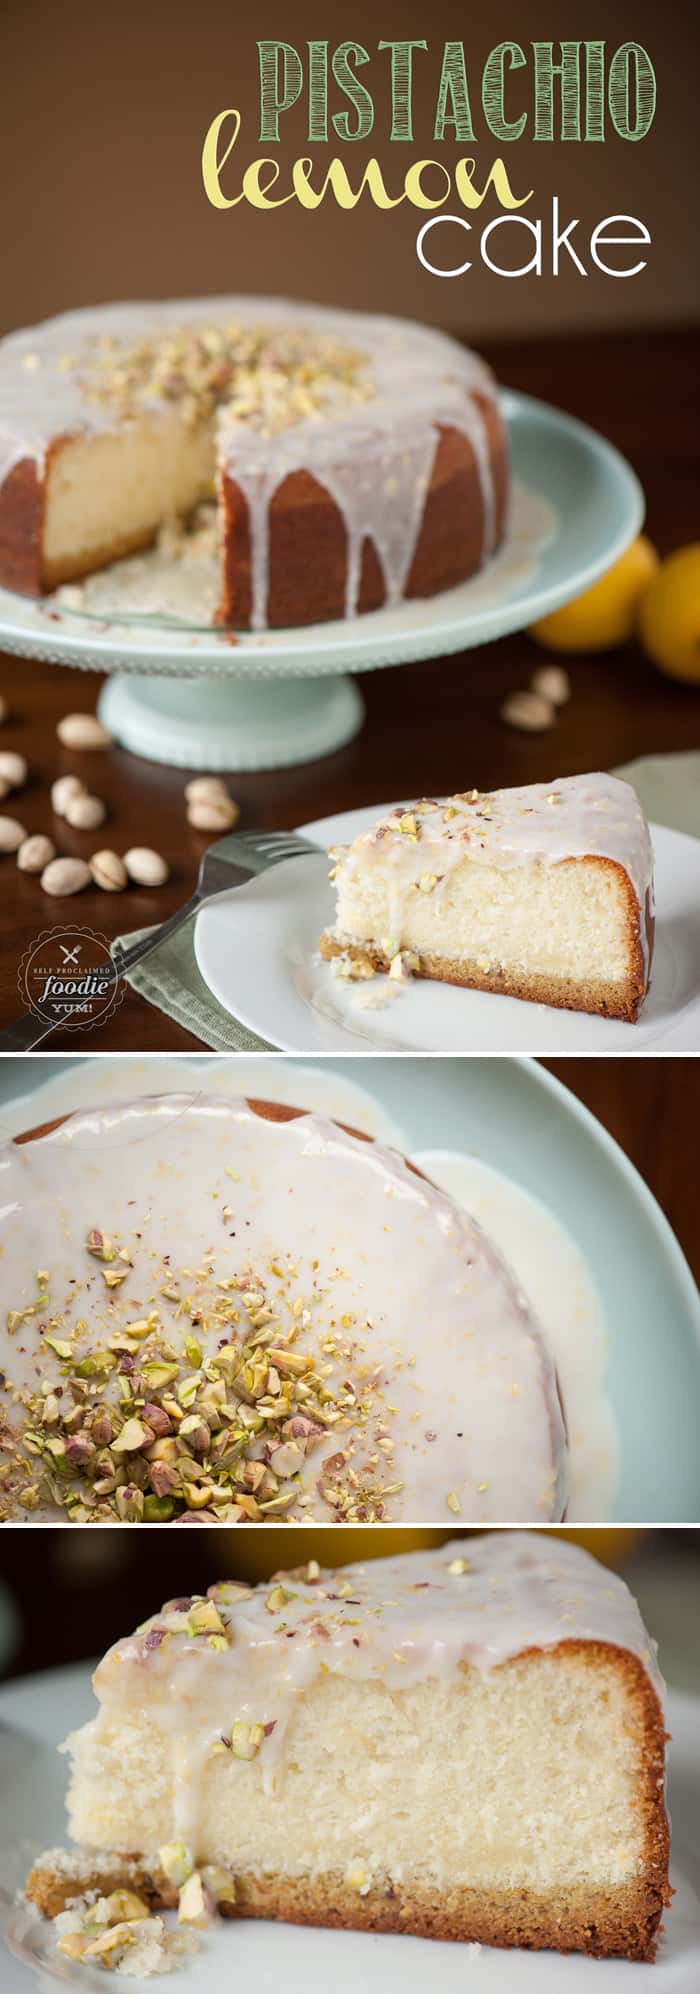 This sweet and rich Lemon Pistachio Cake is sure to impress with its pistachio cookie crust, melt-in-your-mouth lemon cake, and lemon zest icing.